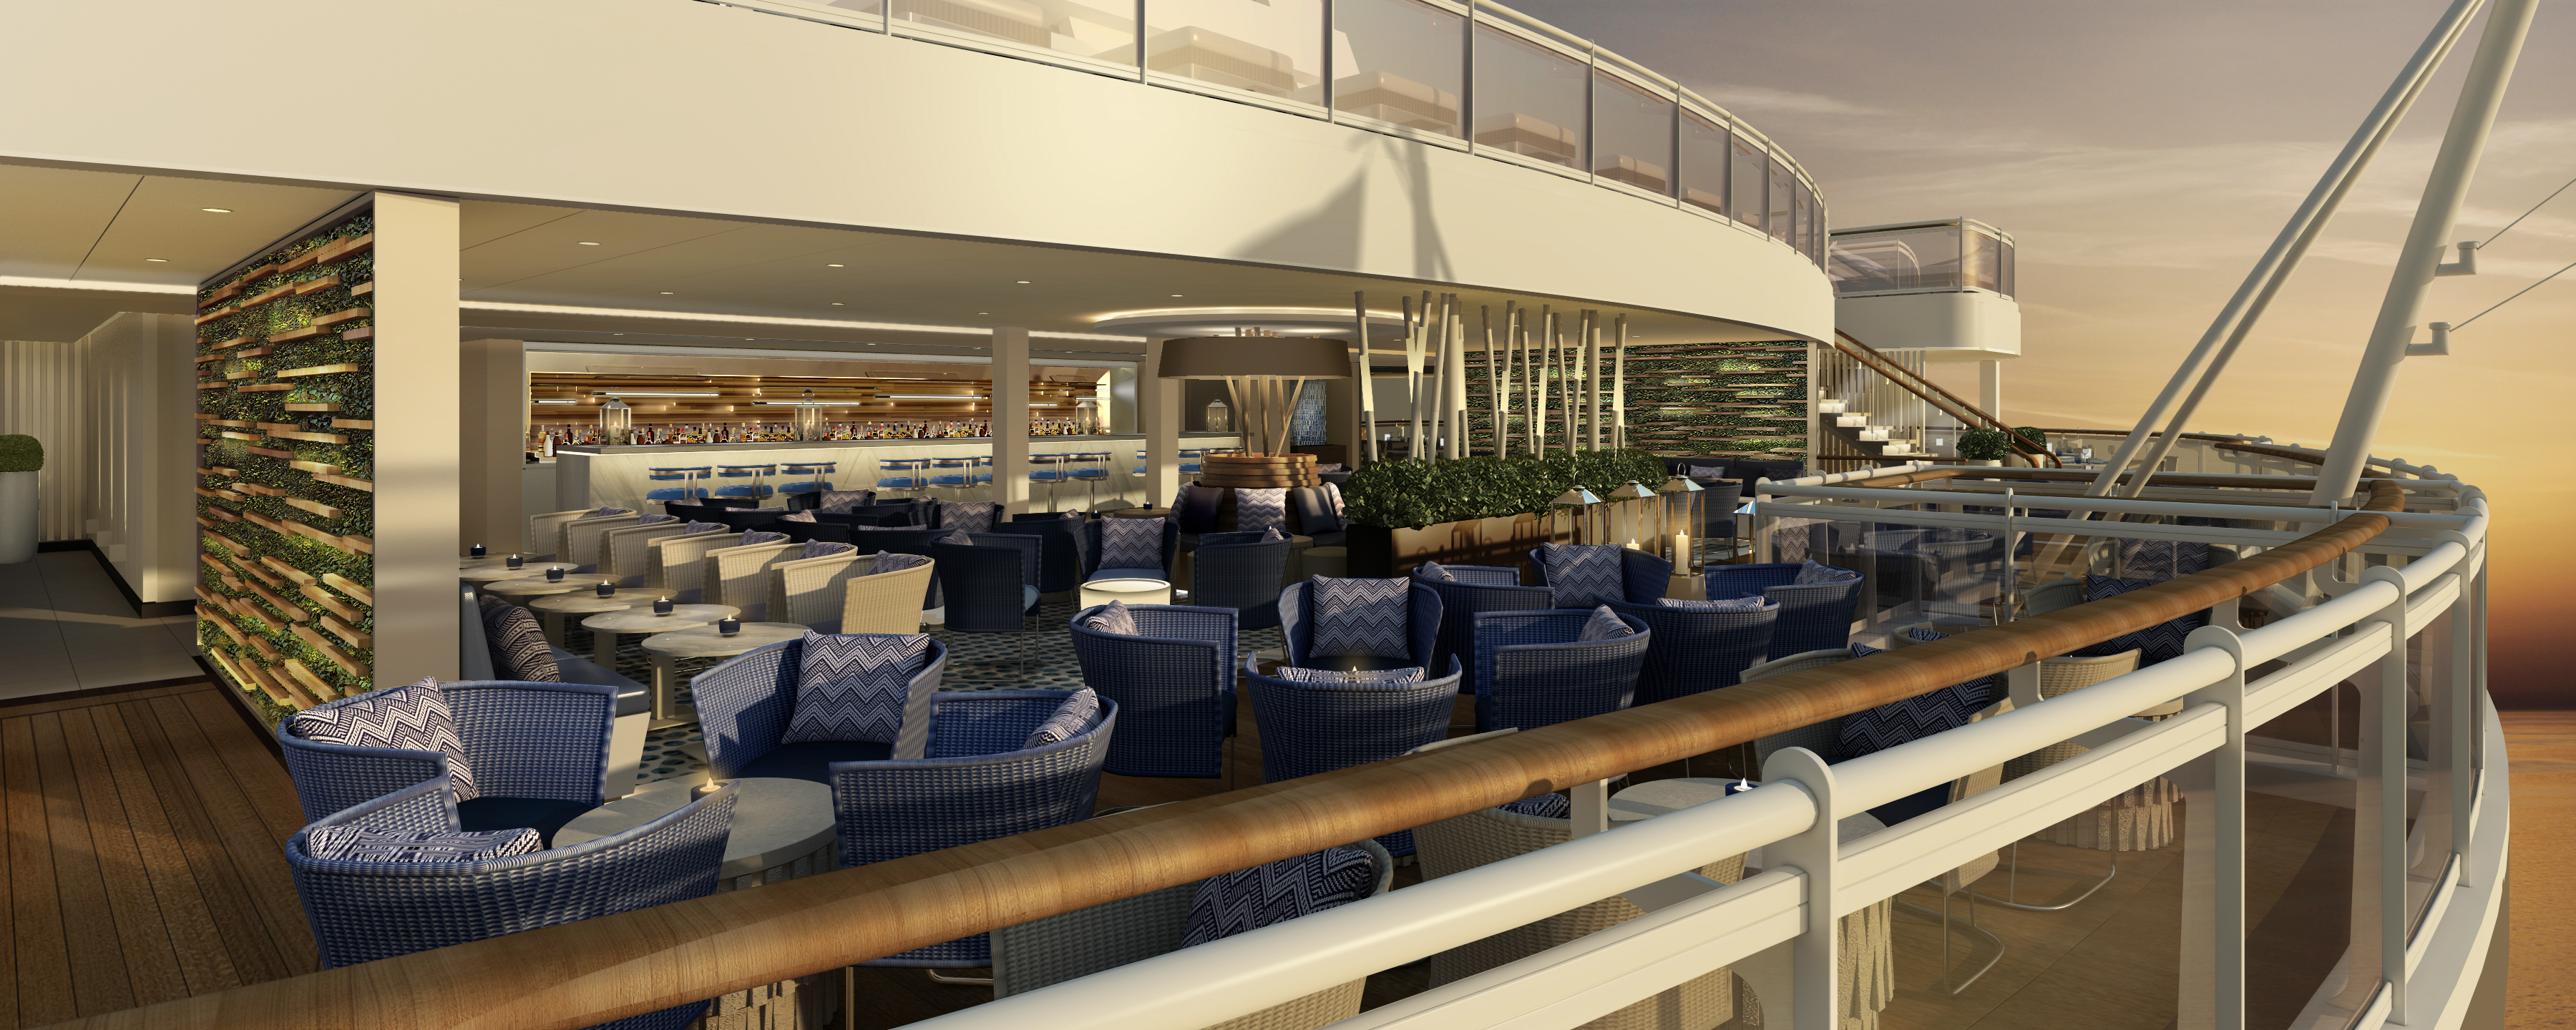 Dining al fresco: The Lido at the rear of the ship (Picture: P&O Cruises)